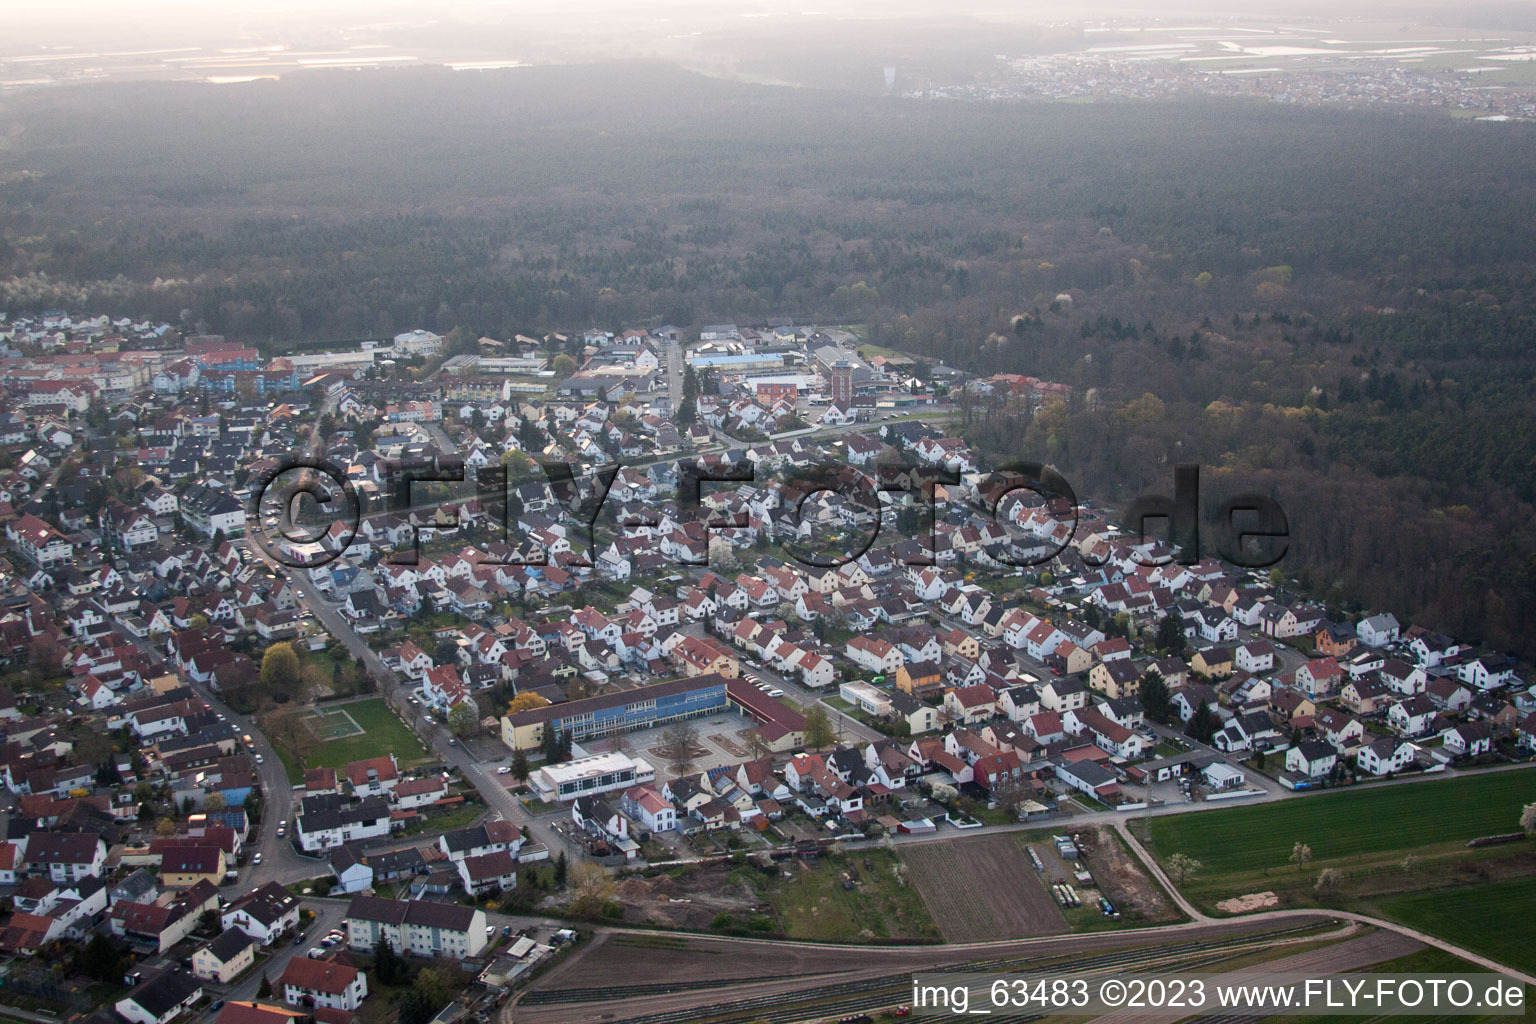 Jockgrim in the state Rhineland-Palatinate, Germany from the drone perspective